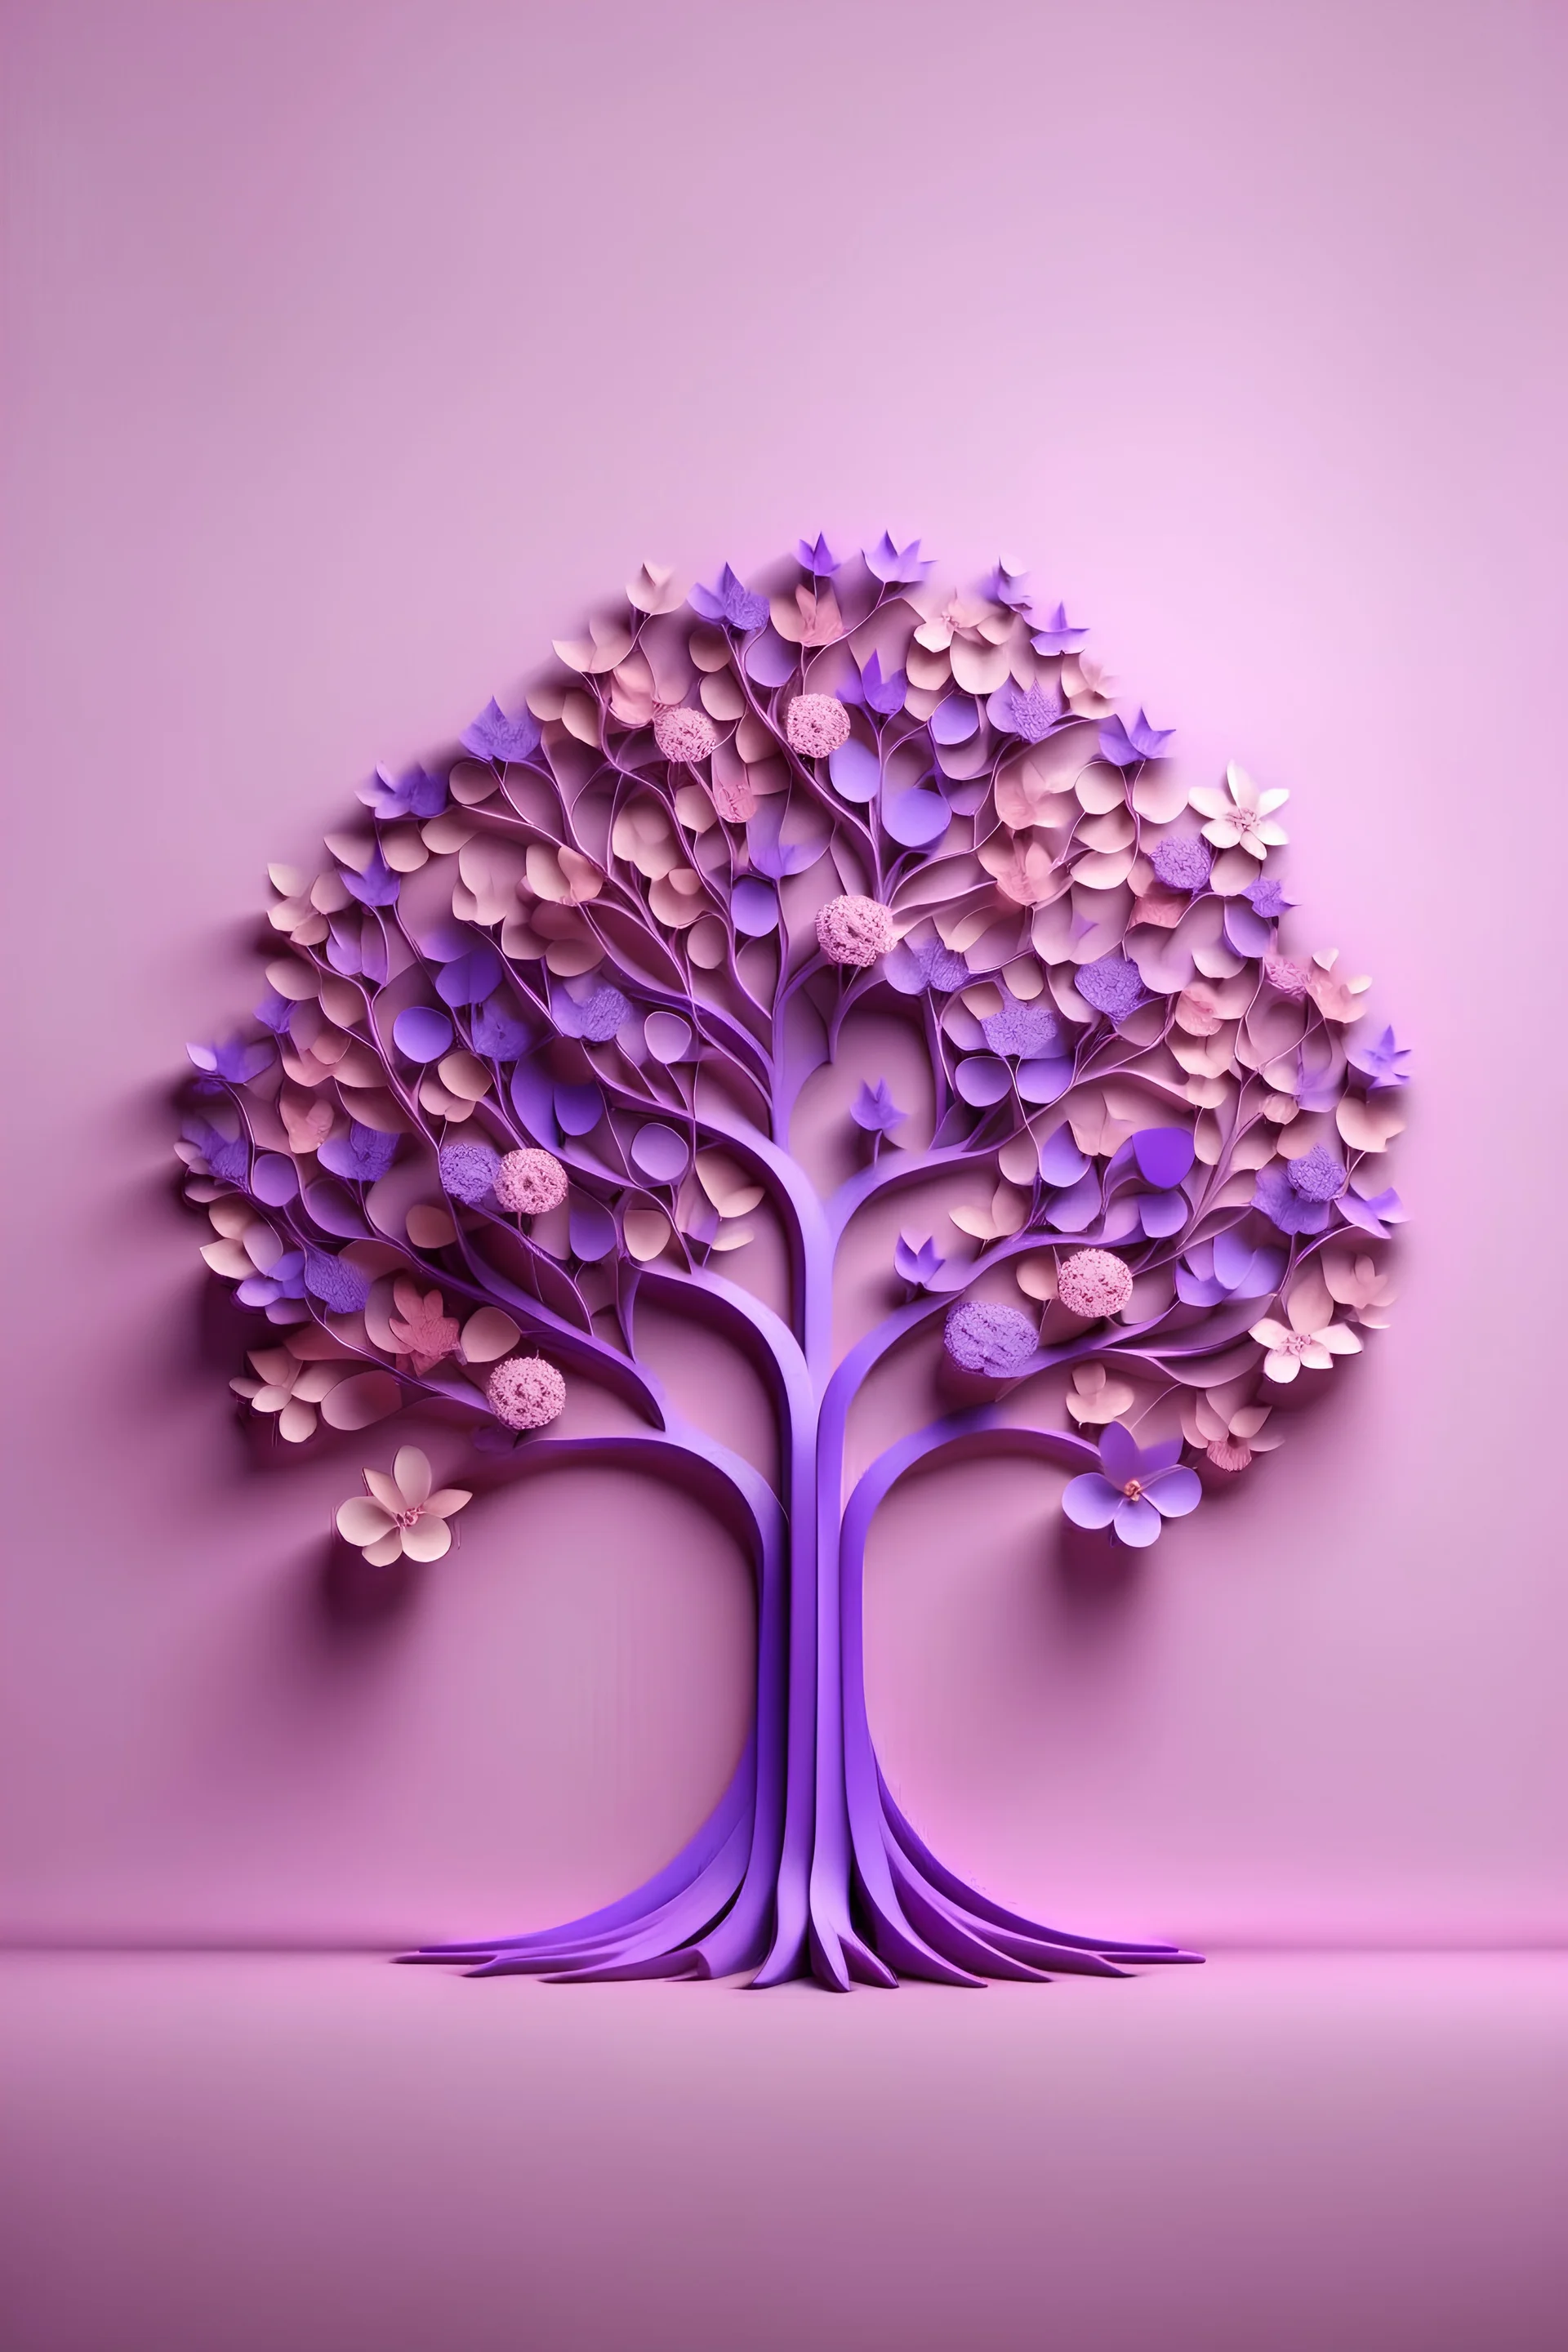 Human brain tree with flowers: self-care and mental health concept in purple baground